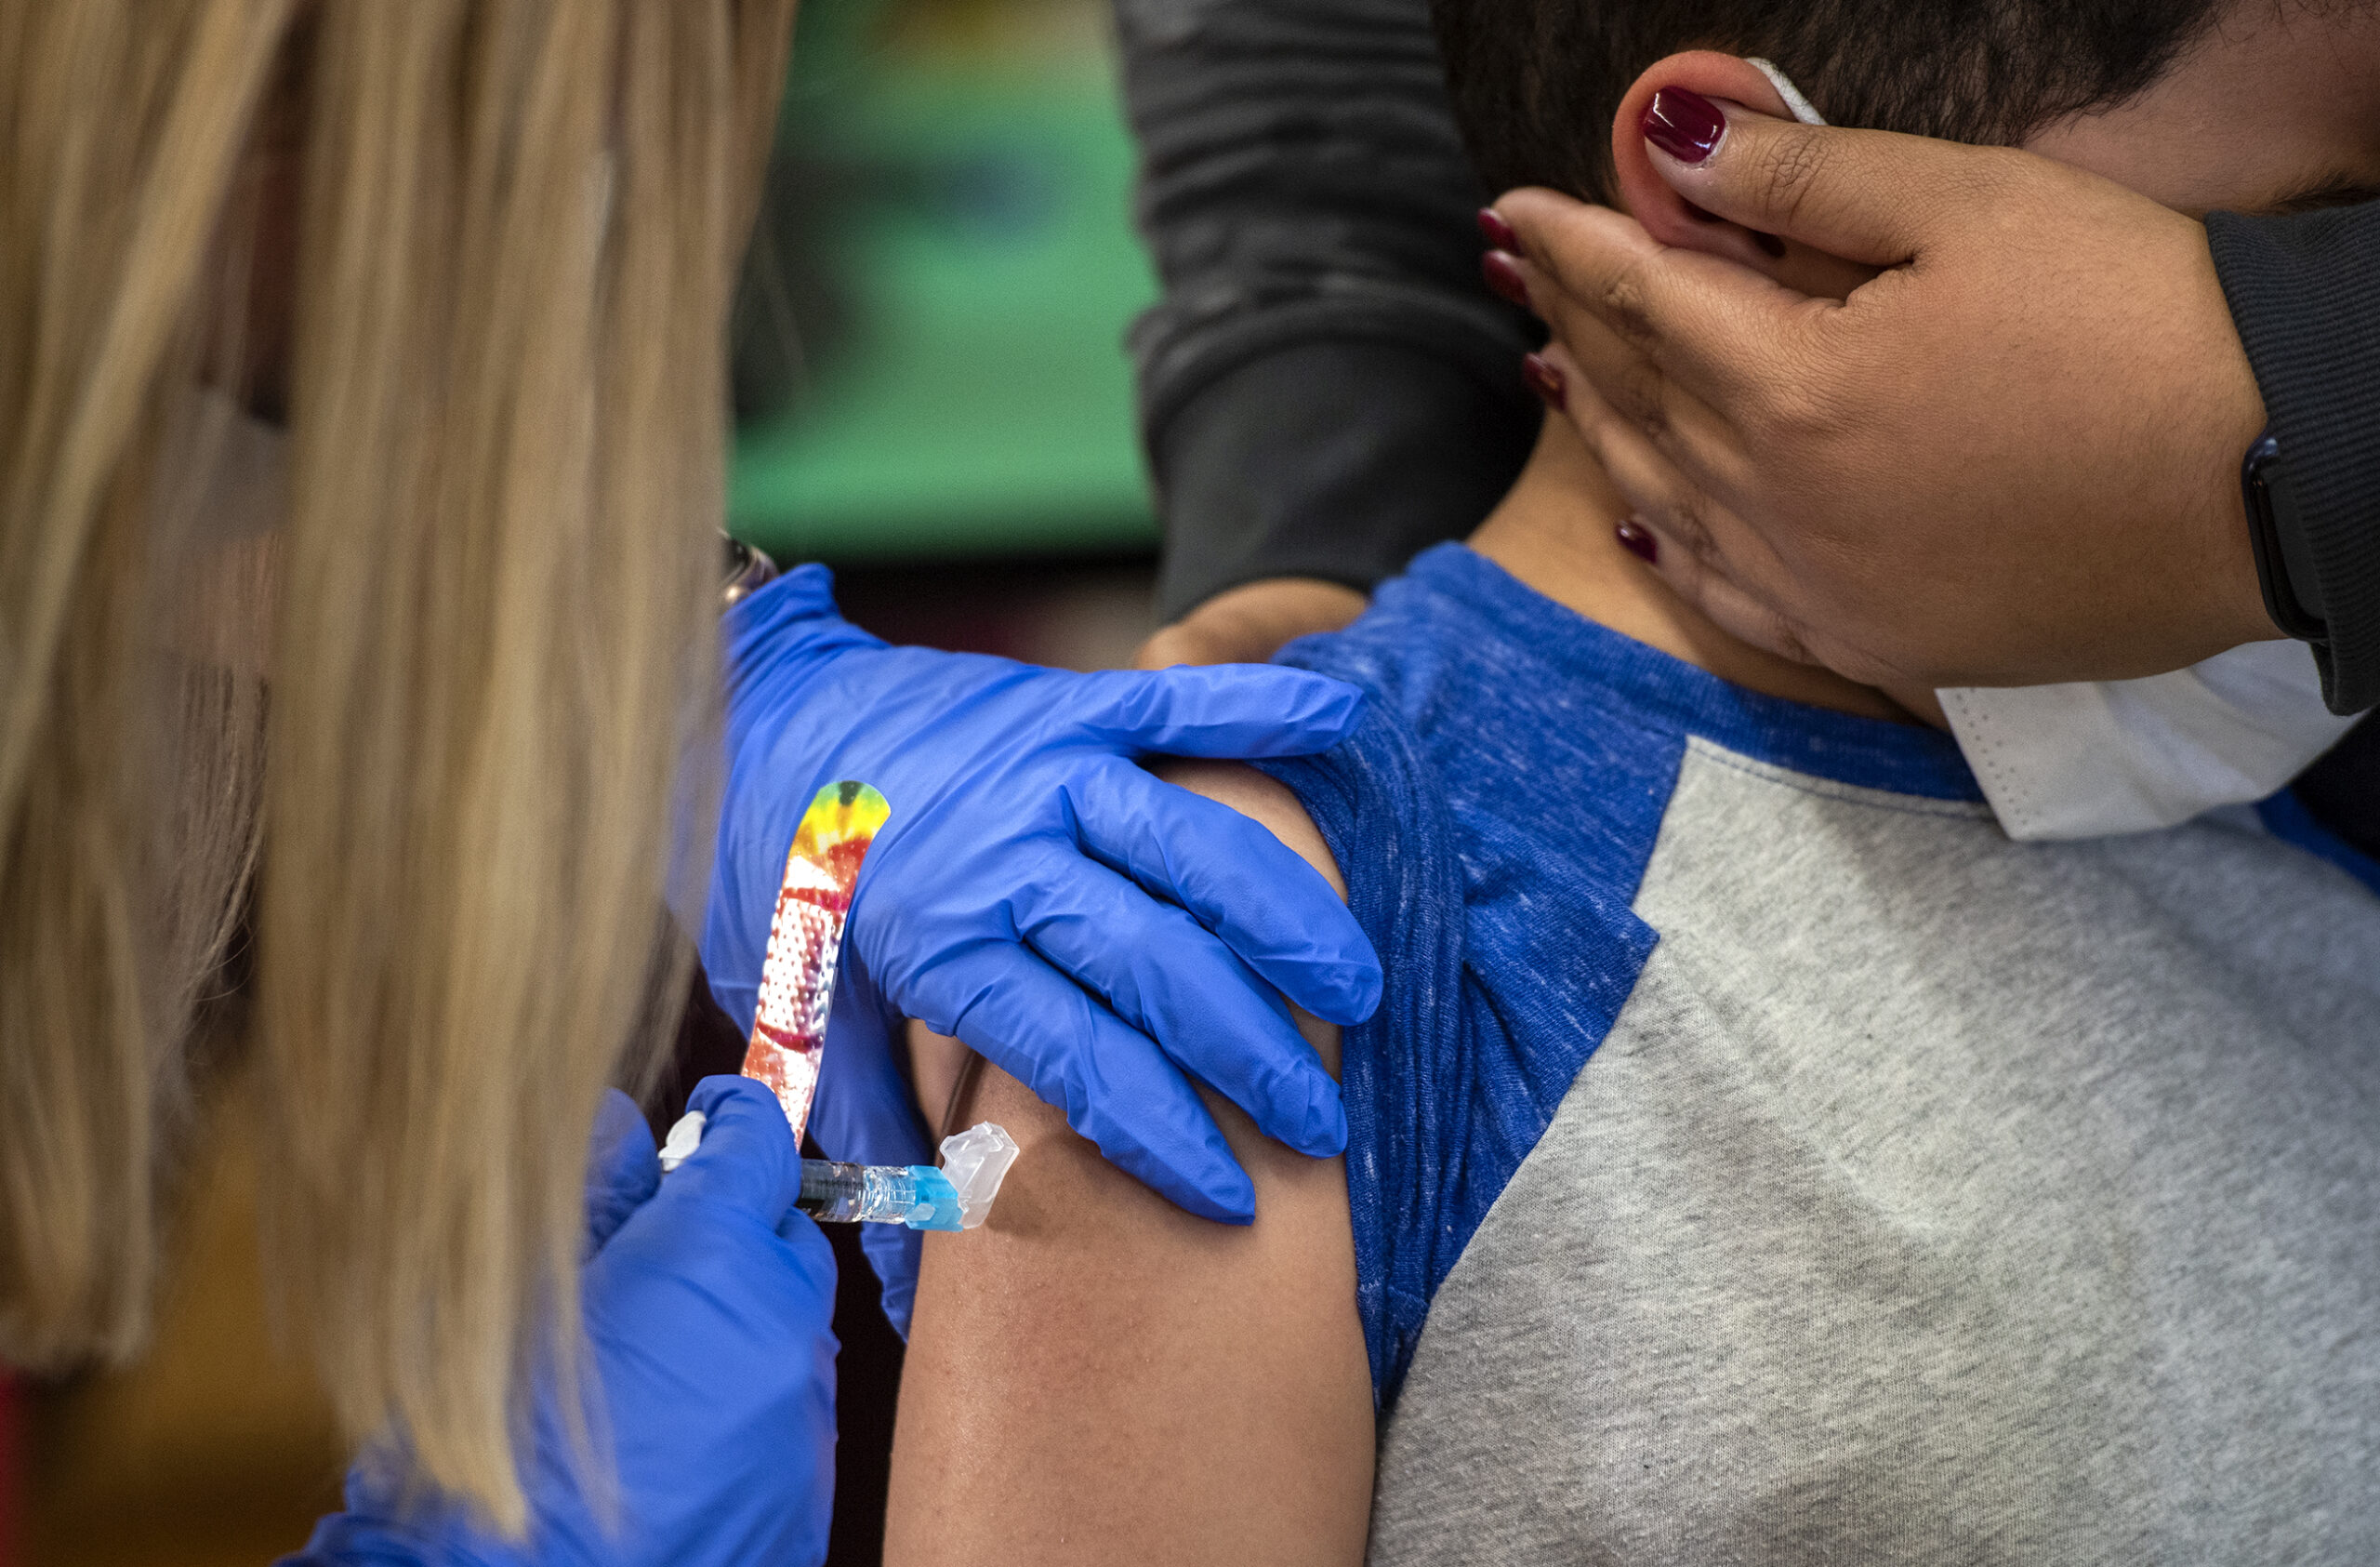 A vaccine goes into the arm of a child.